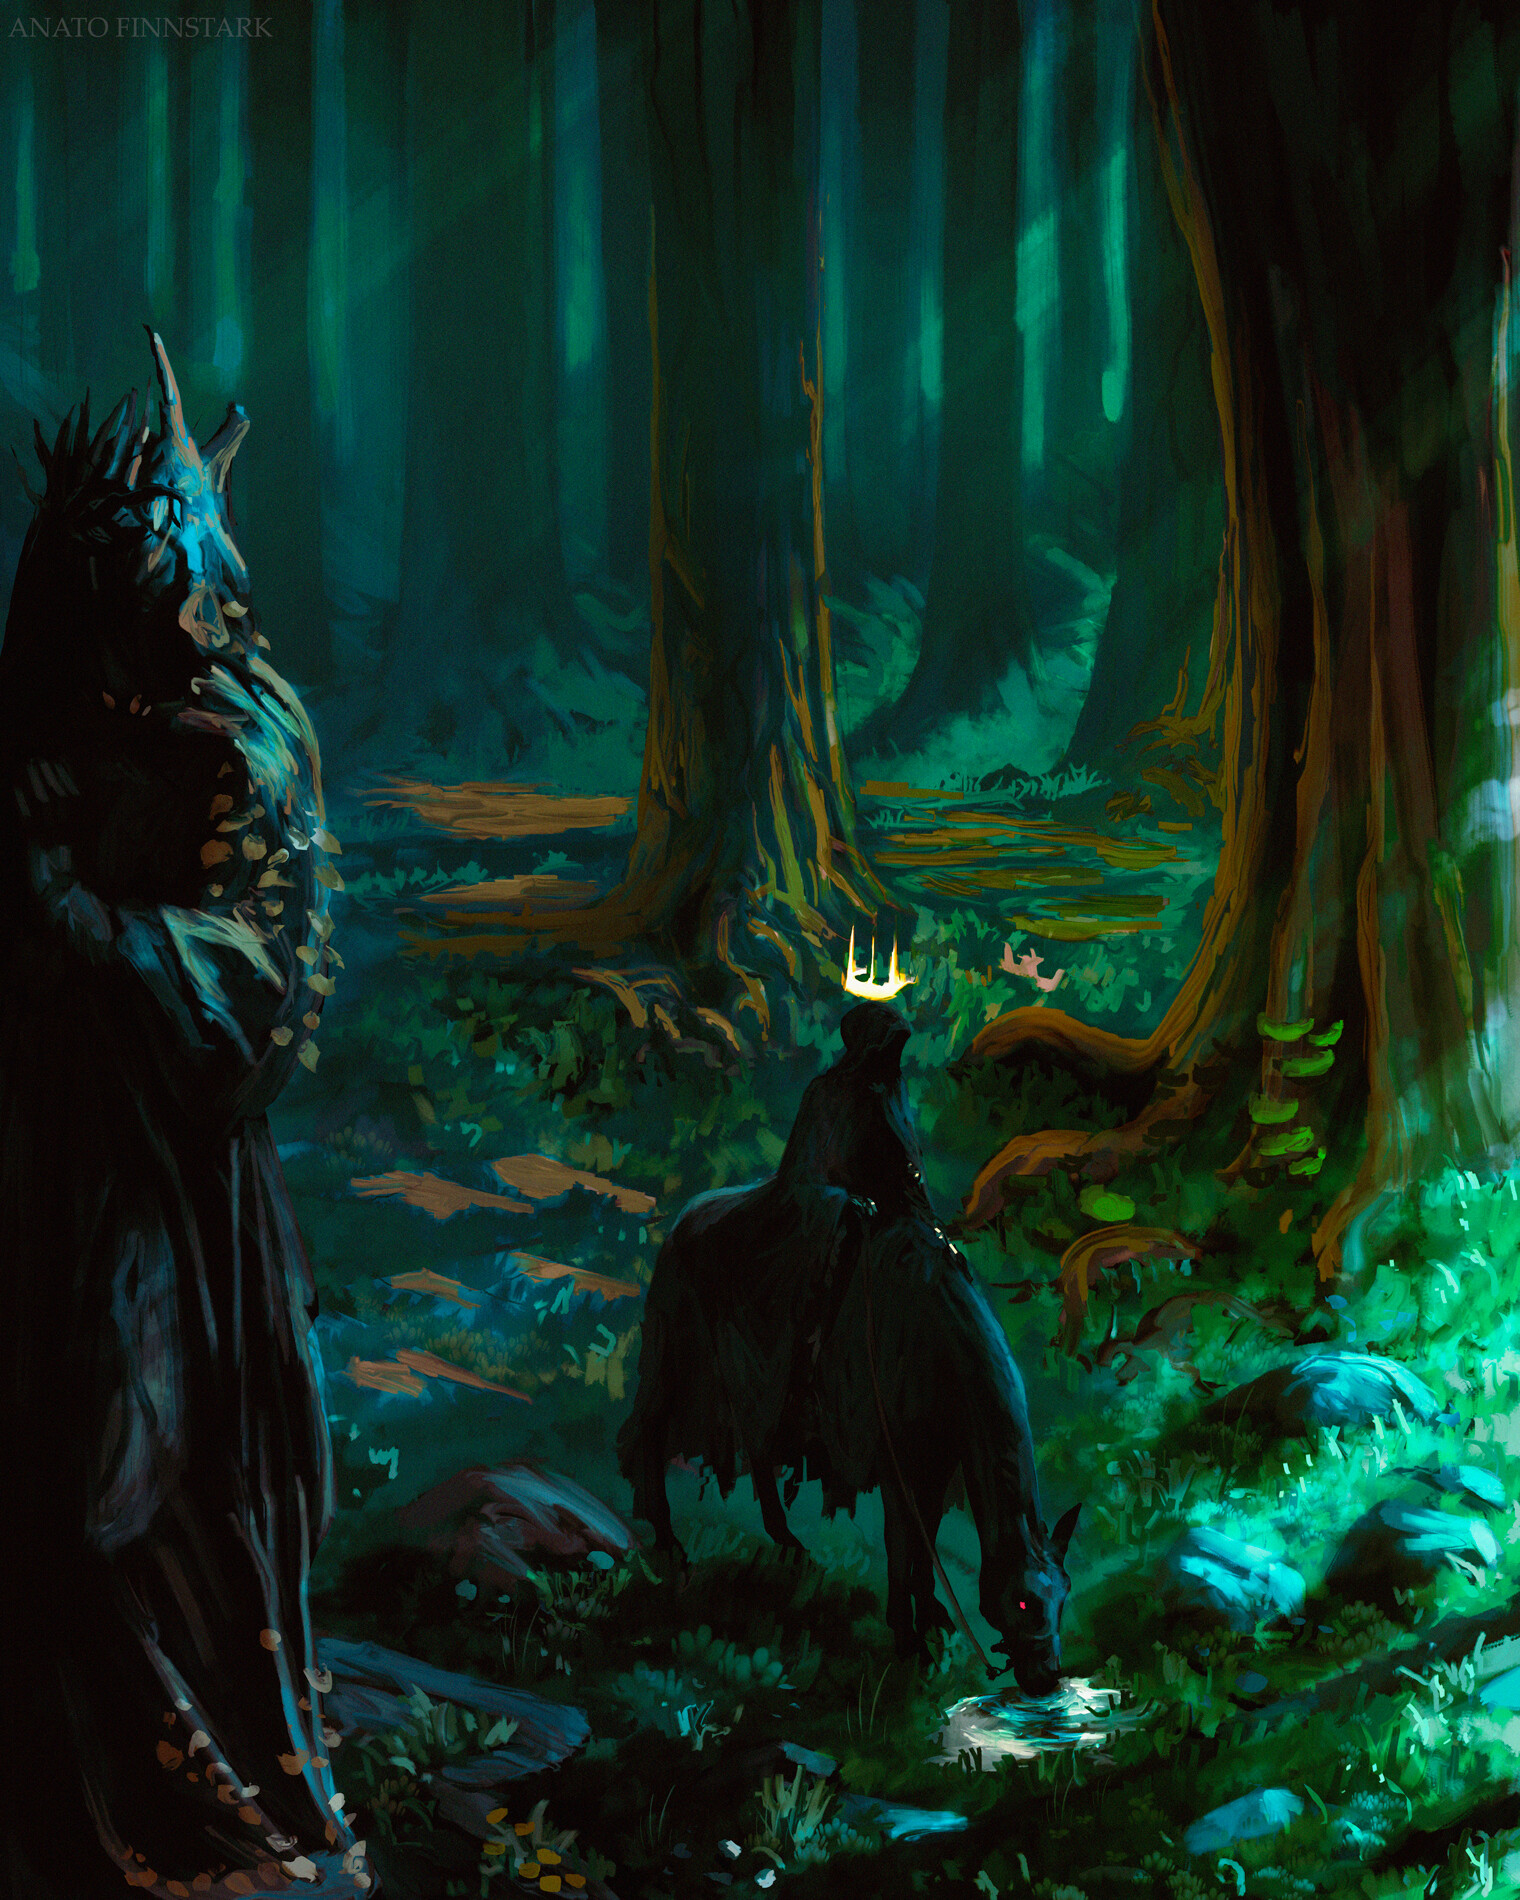 General 1520x1900 artwork fantasy art Anato Finnstark The Lord of the Rings Middle-Earth Nazgûl